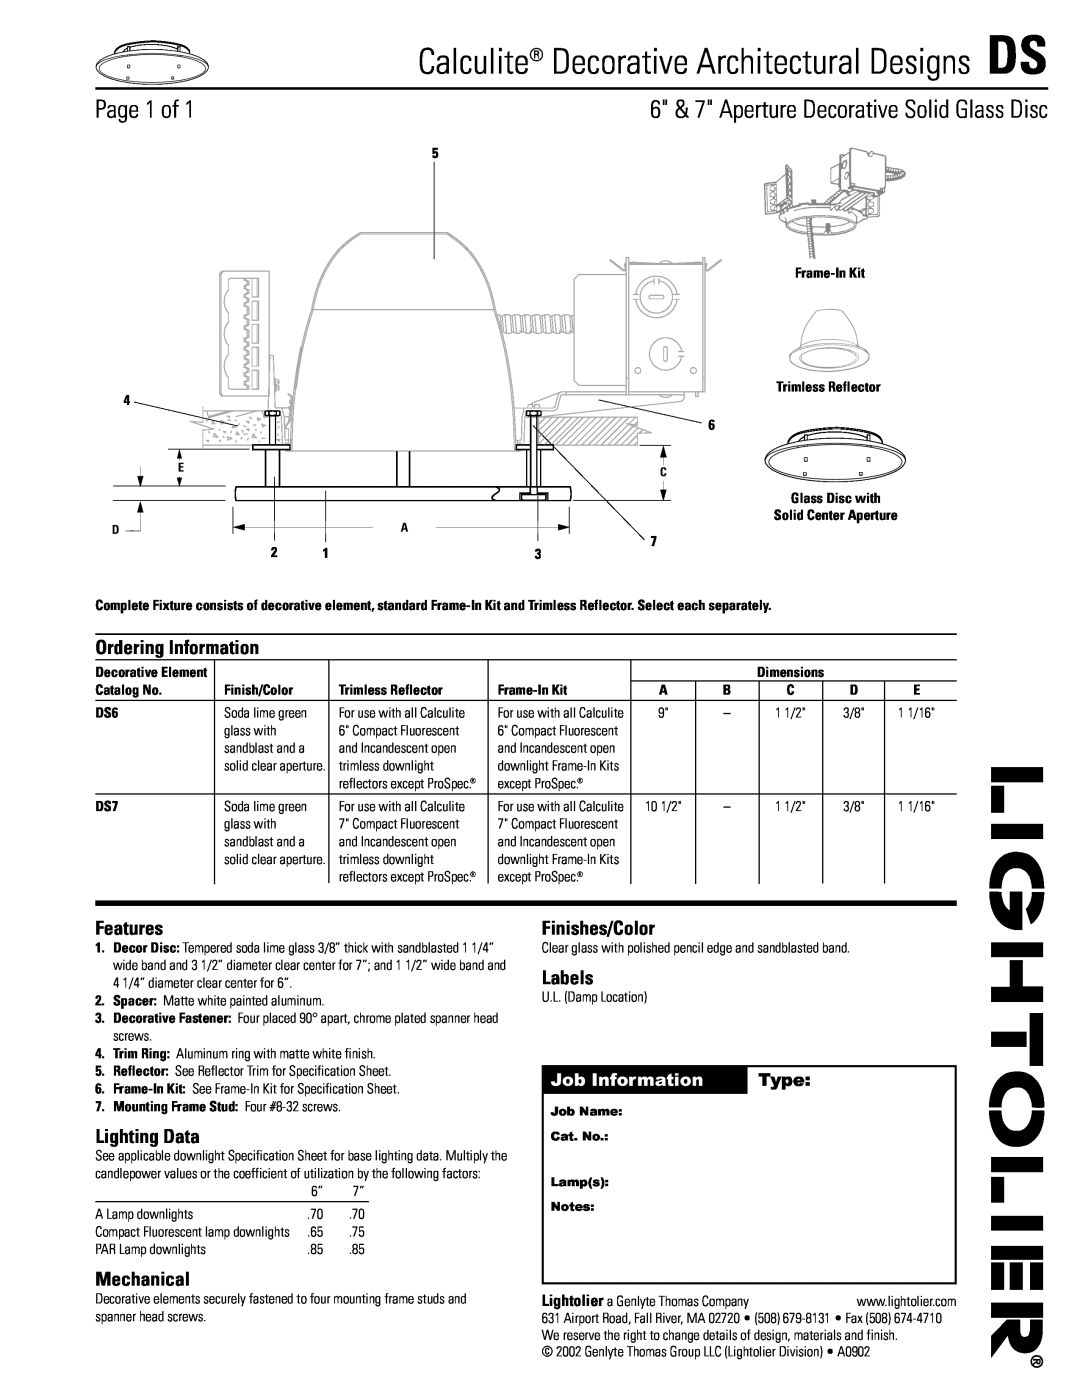 Lightolier specifications Calculite Decorative Architectural Designs DS, Page 1 of, Ordering Information, Features 